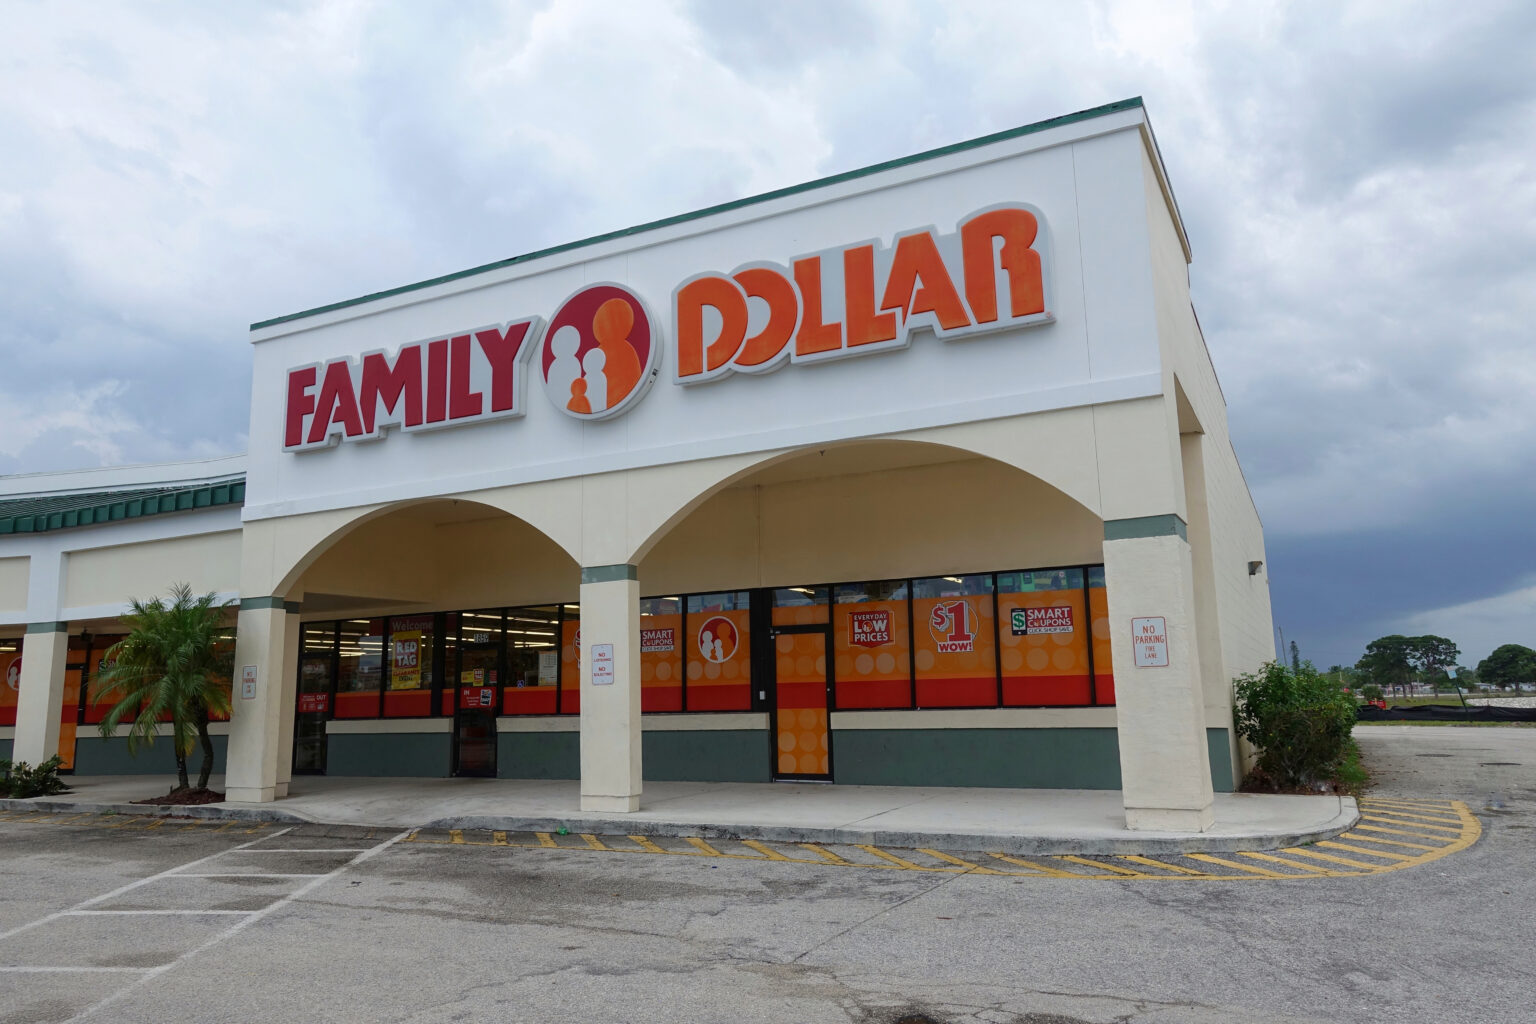 Exterior of a Family Dollar store that sells gift cards